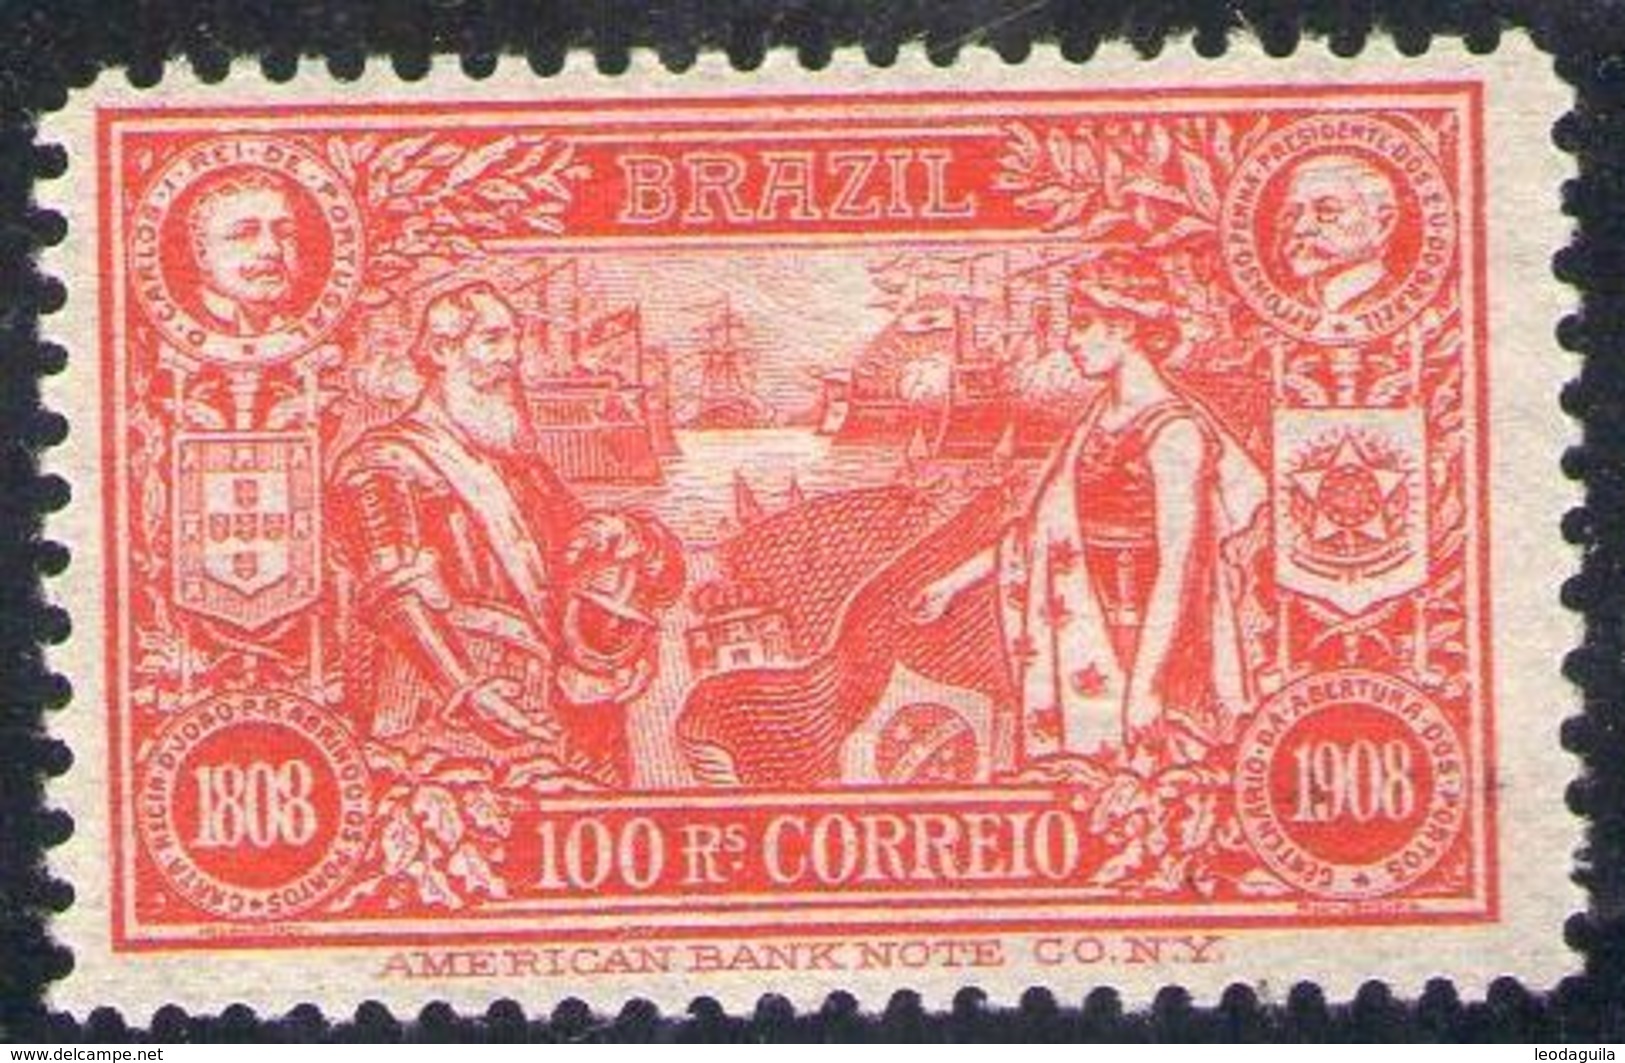 BRAZIL # 190  -  CENTENARY  OF THE OPENING OF PORTS   -  MH  - 1908 - Ungebraucht